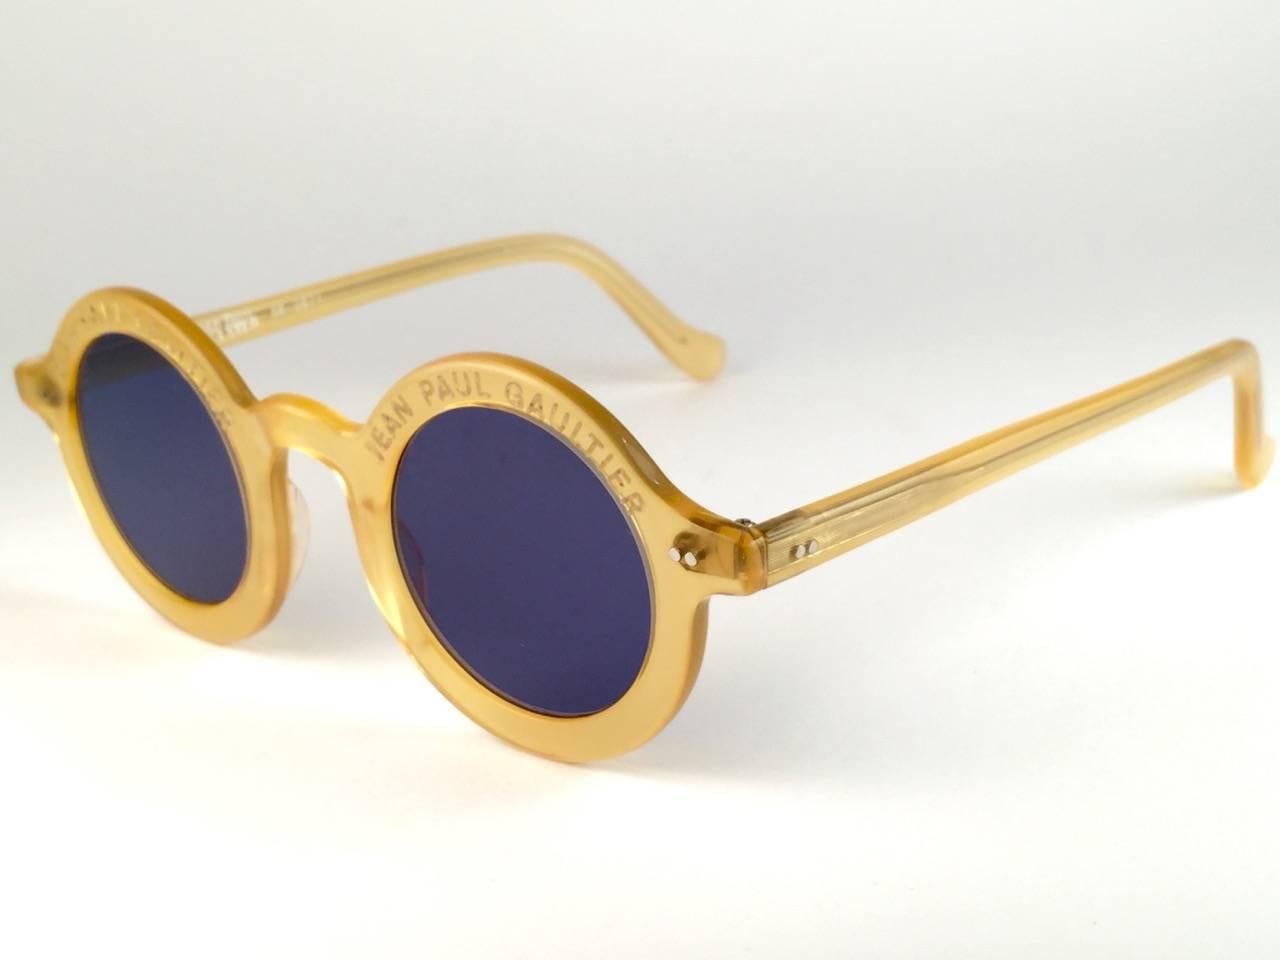 
New Jean Paul Gaultier 56 0071 Iconic round yellow frame. 
Flat blue lenses that complete a ready to wear JPG look.
Amazing quality and design. A piece of sunglasses history.
This pair has small marks due to nearly 30 years of storage. 
Design and